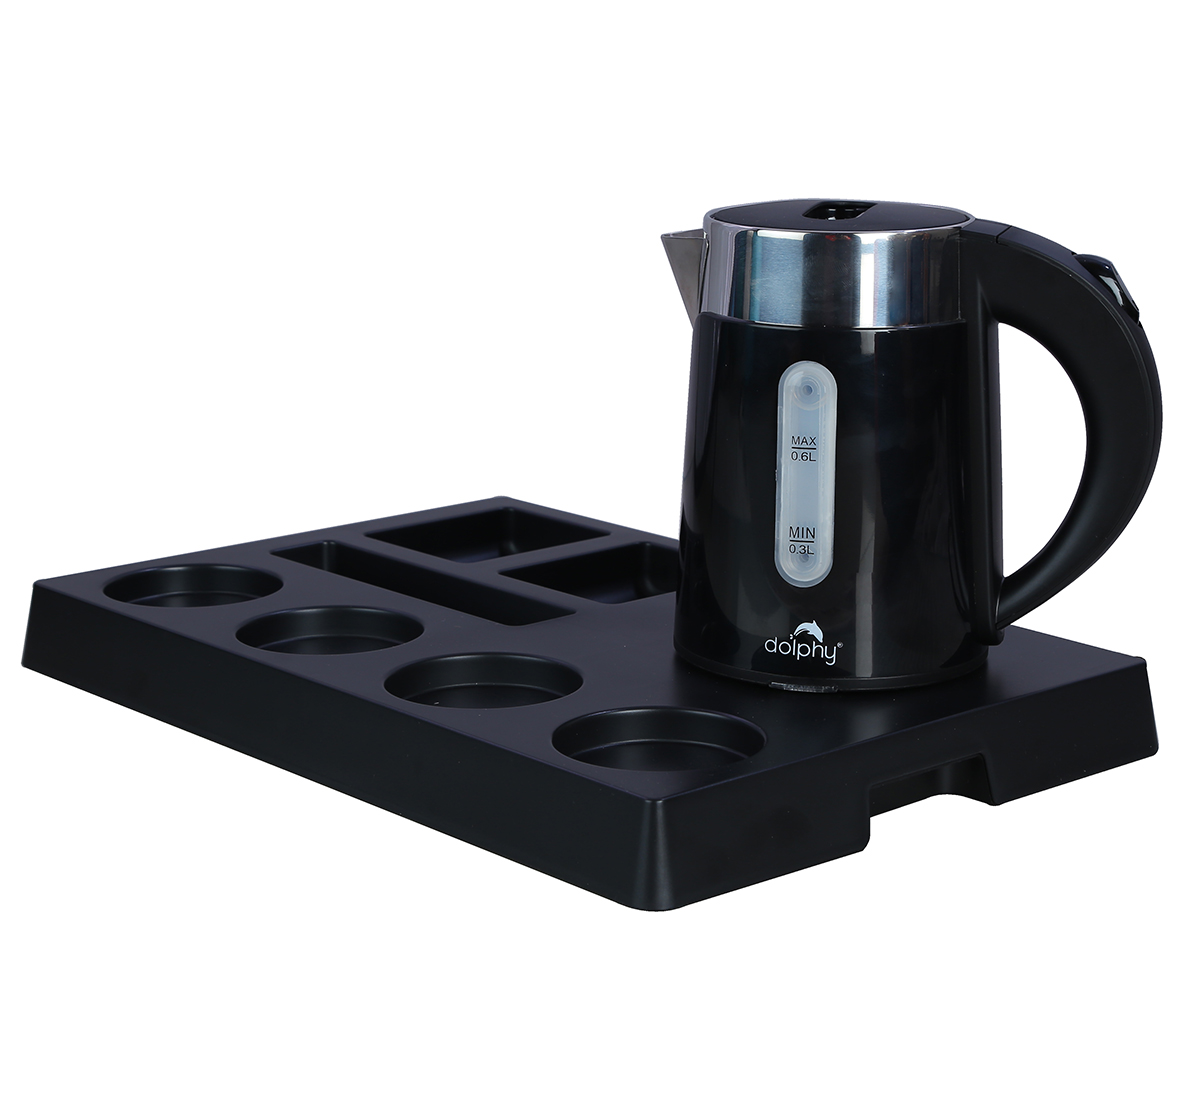 Black ABS electric kettle with black tray